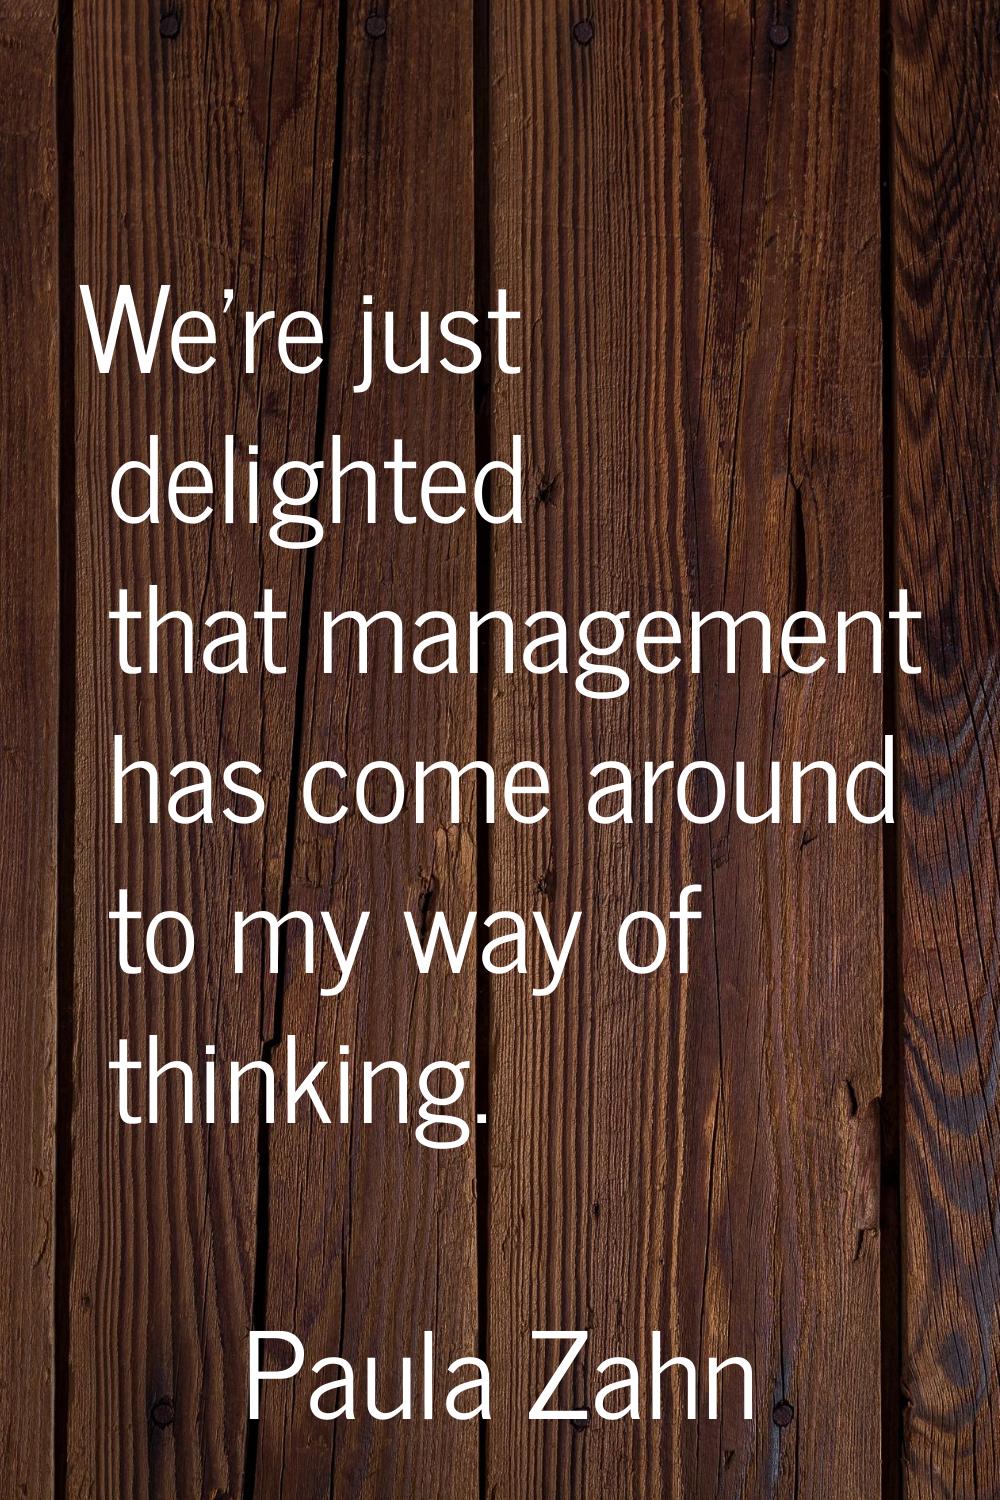 We're just delighted that management has come around to my way of thinking.